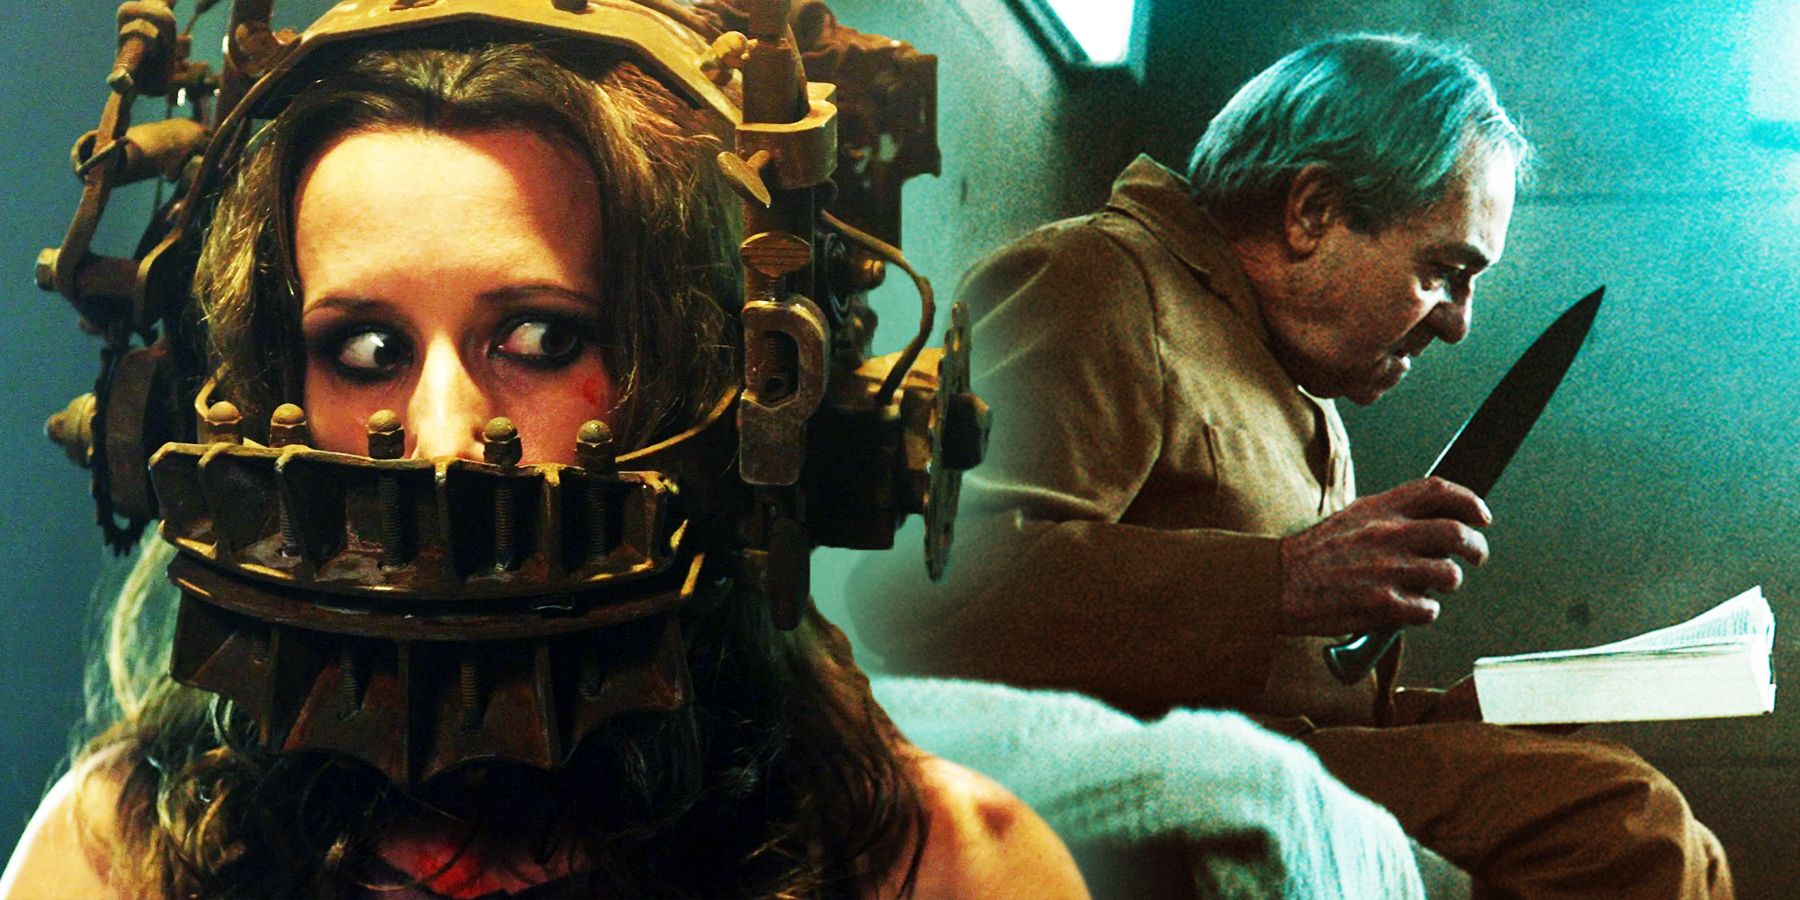 10 Best 'Saw' Movie Death Traps and Games, Ranked